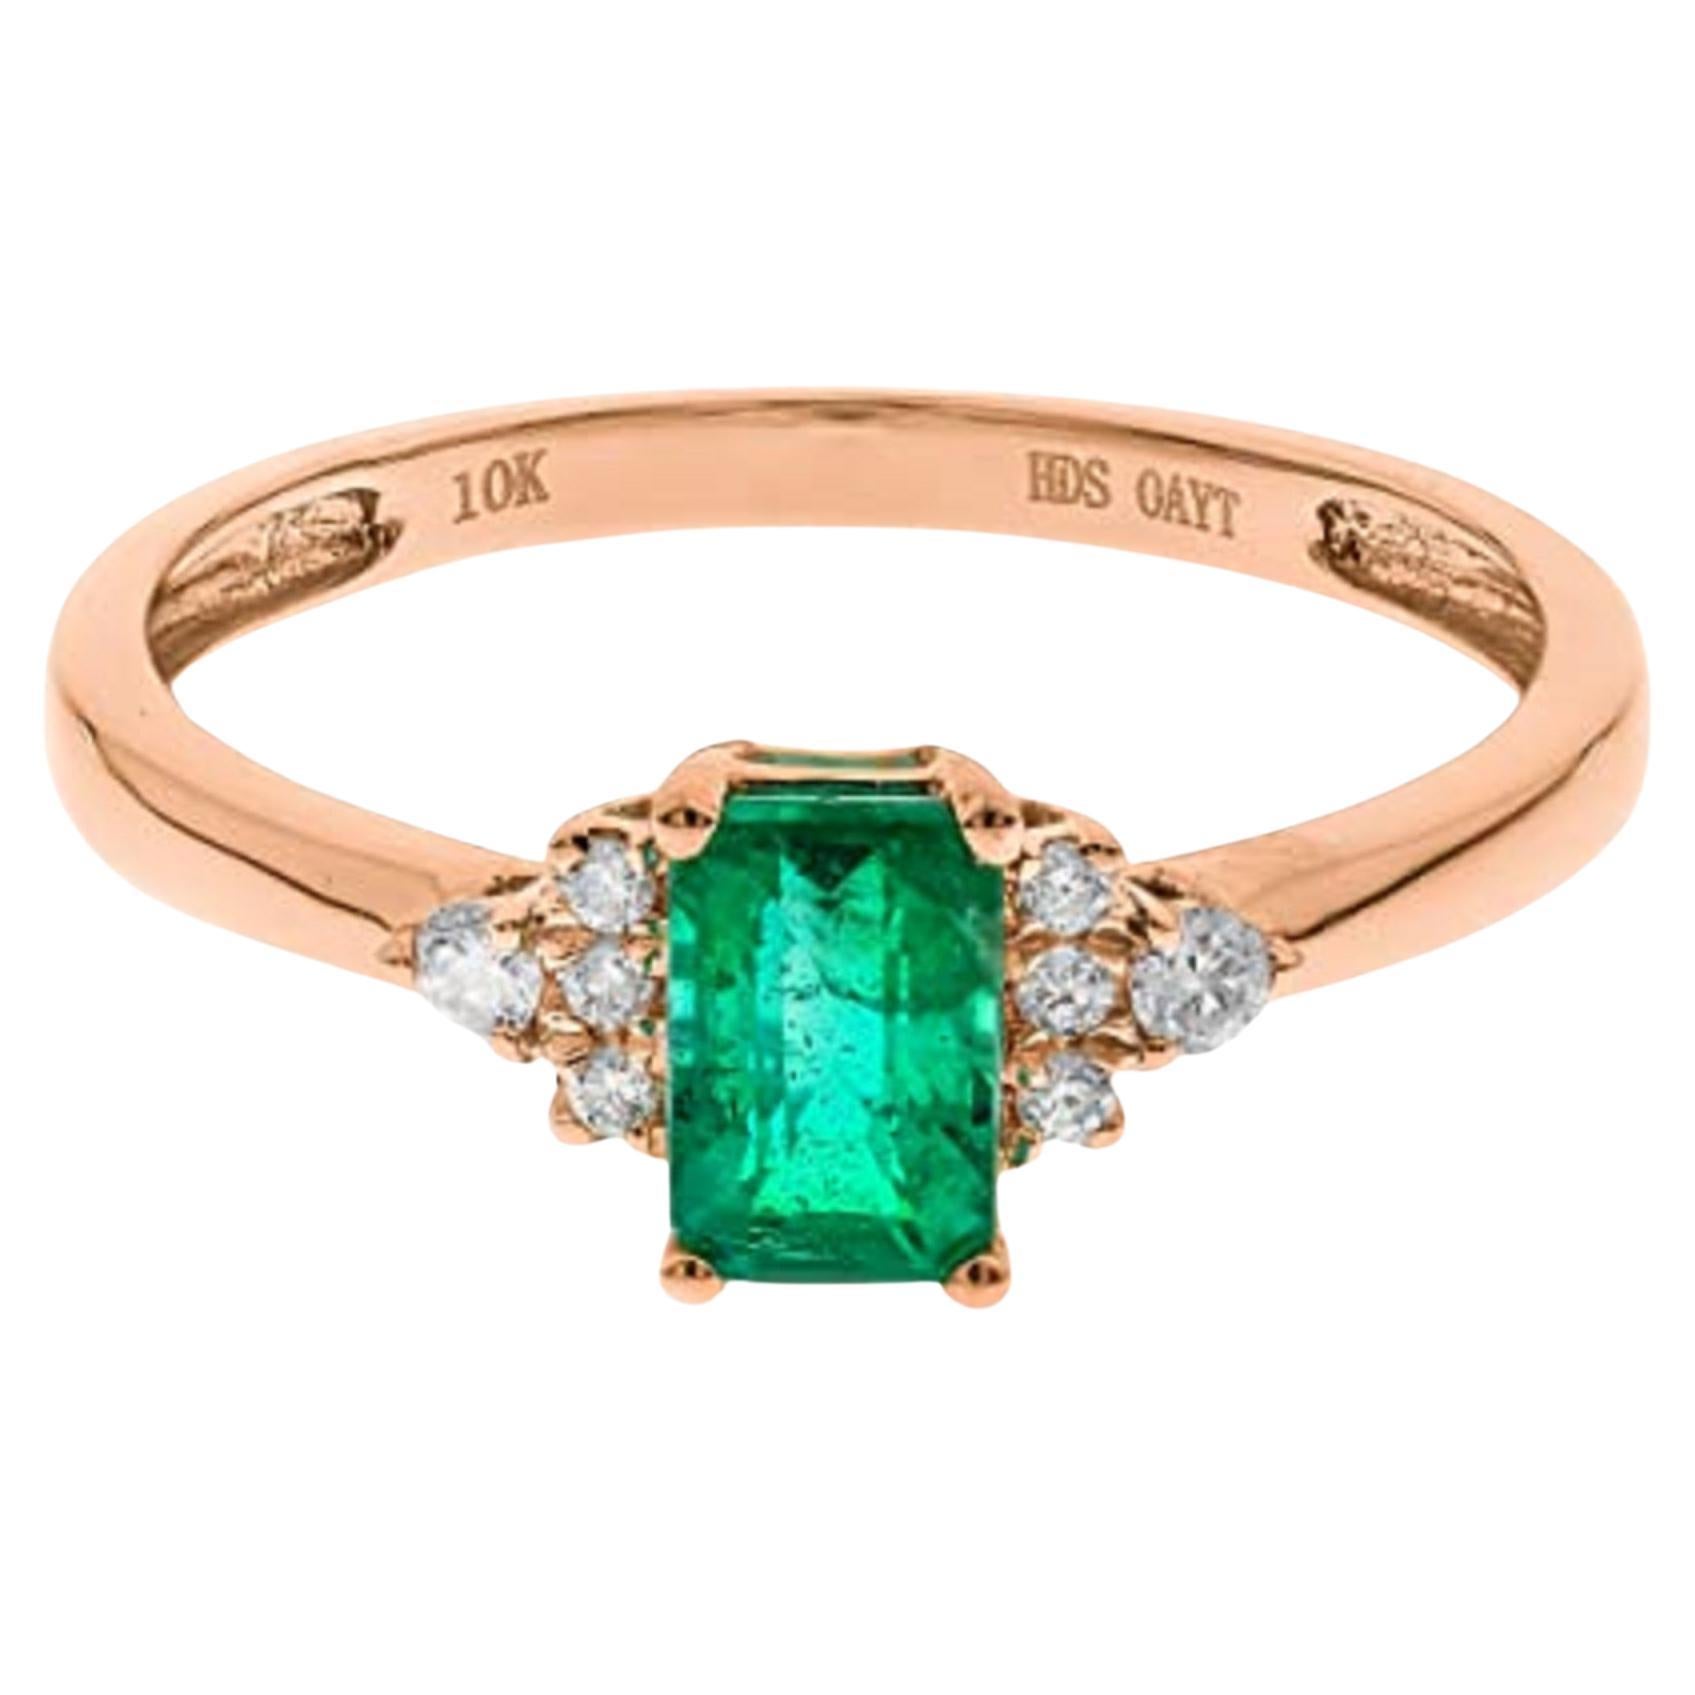 Gin & Grace 10K Rose Gold Genuine Emerald Ring with Diamonds for women For Sale